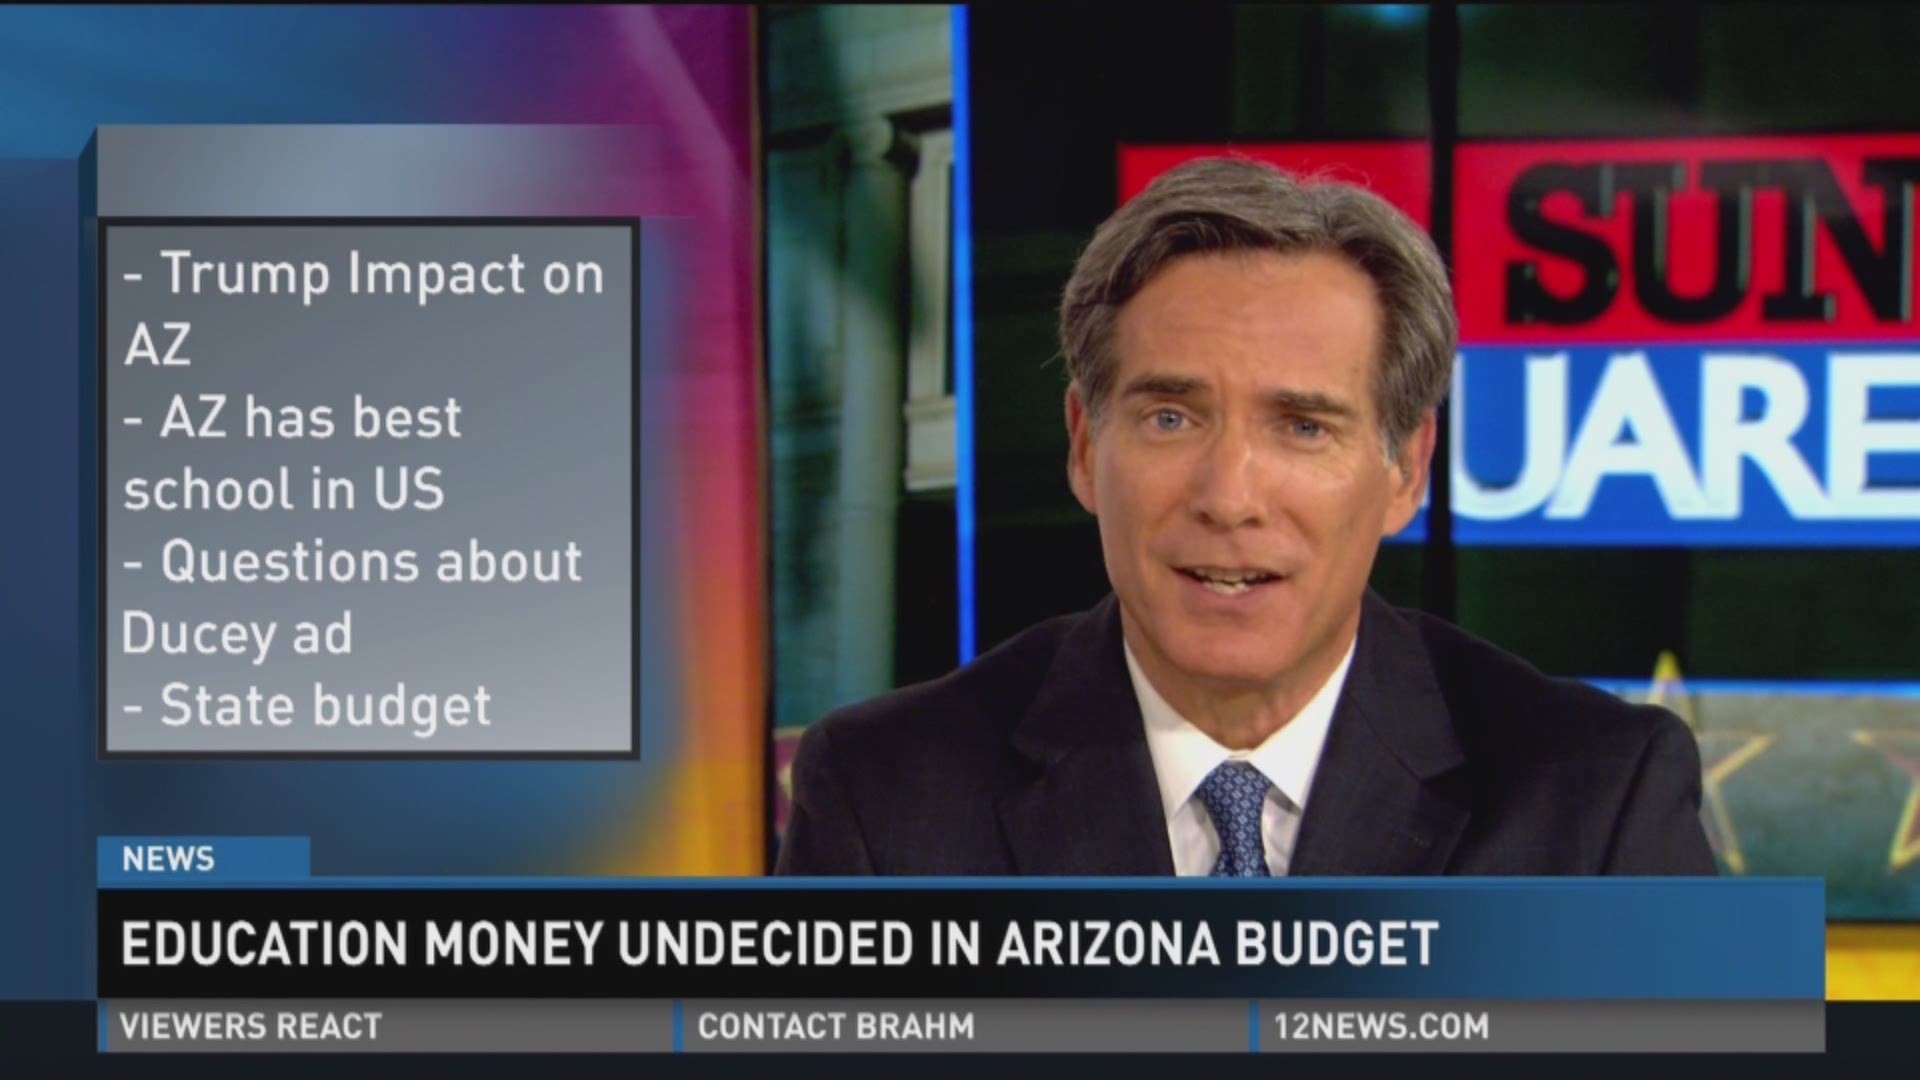 Will it be Gov. Ducey's 0.4 percent raise or the 1 percent hike pushed by House Republicans? Those are the puny pay raises for Arizona teachers being discussed as the state budget steams toward passage.